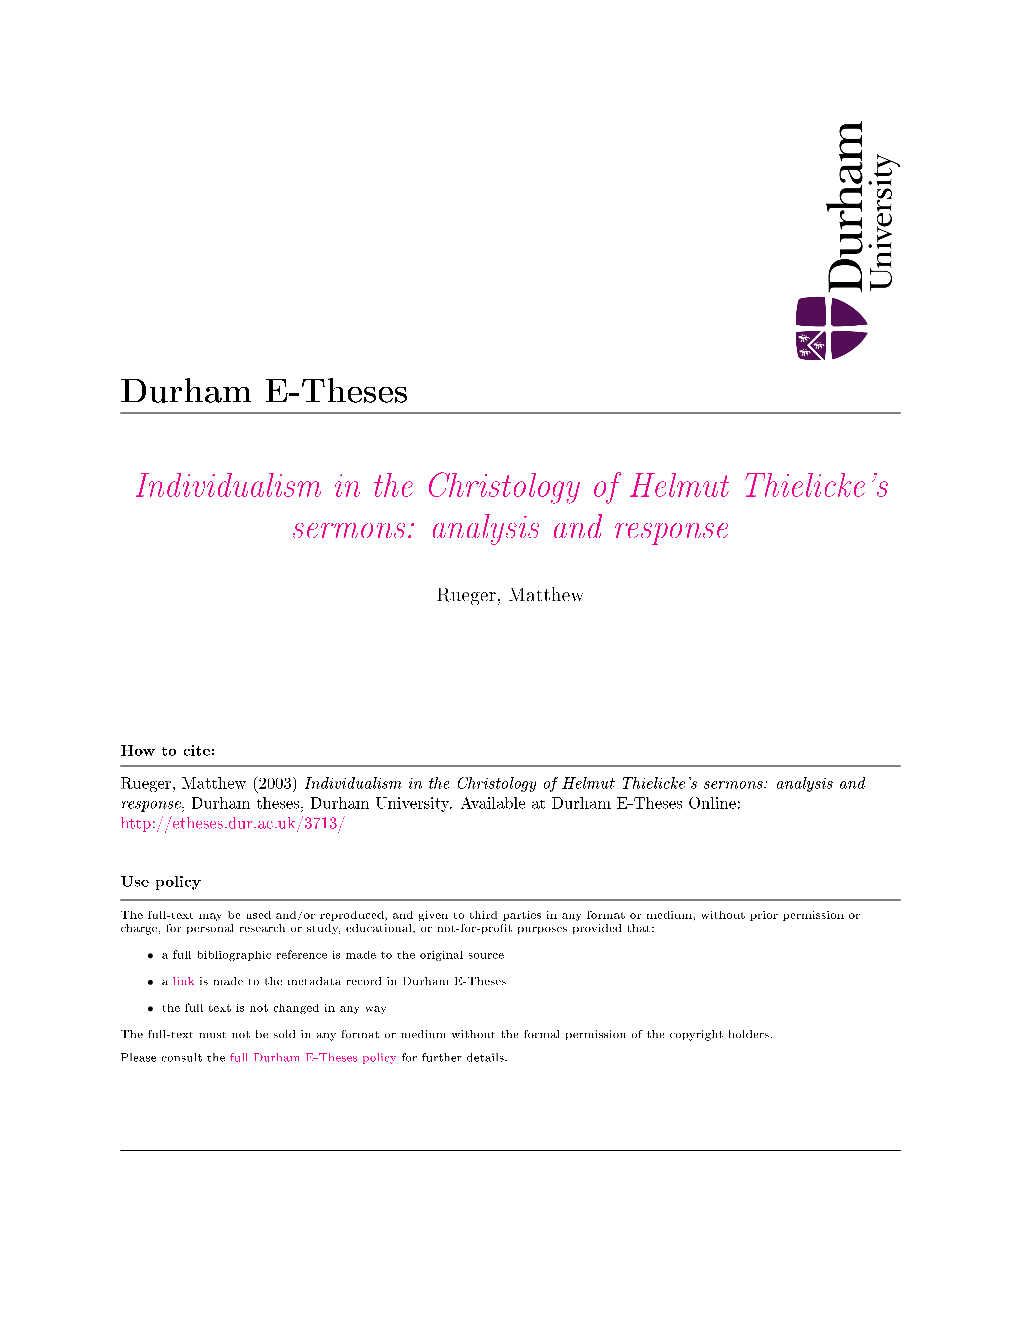 Individualism in the Christology of Helm Ut Thielicke's Sermons: Analysis and Response